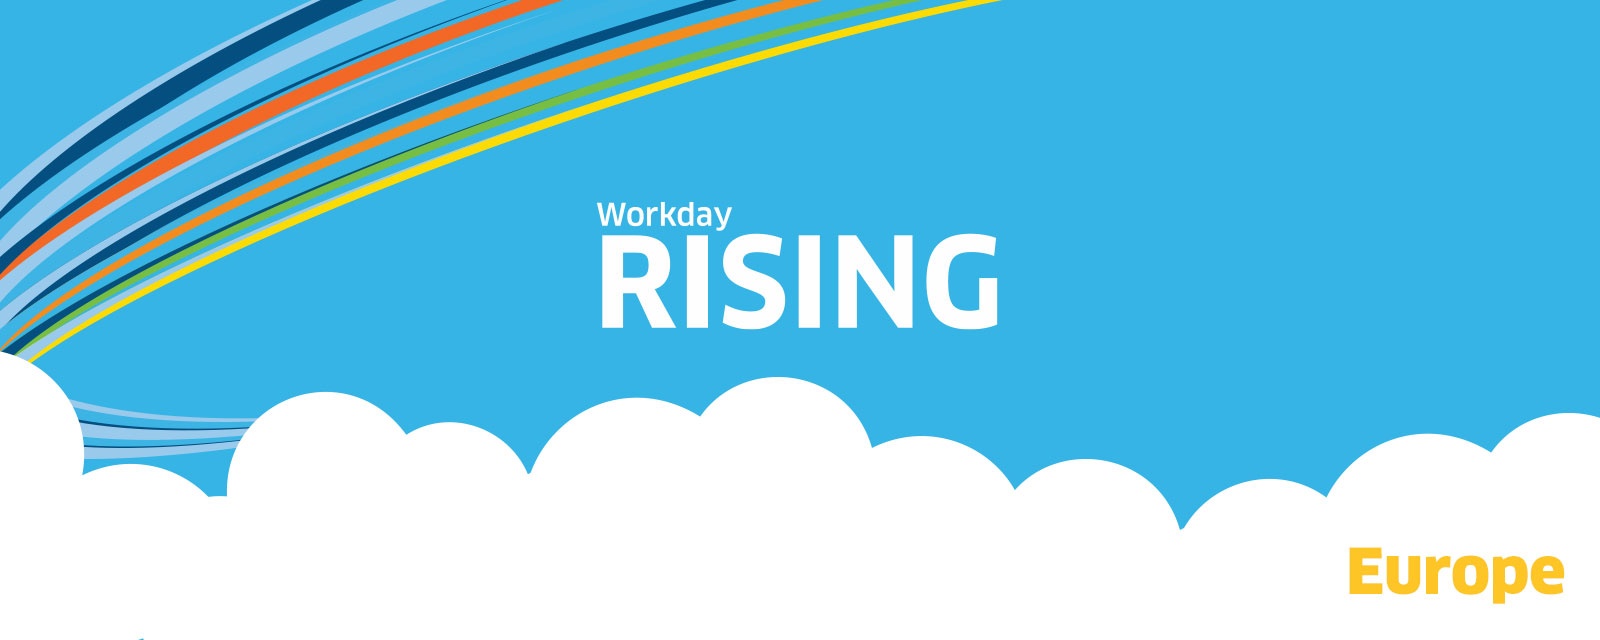 Workday Rising Europe Daily Building on Inspiration Workday US